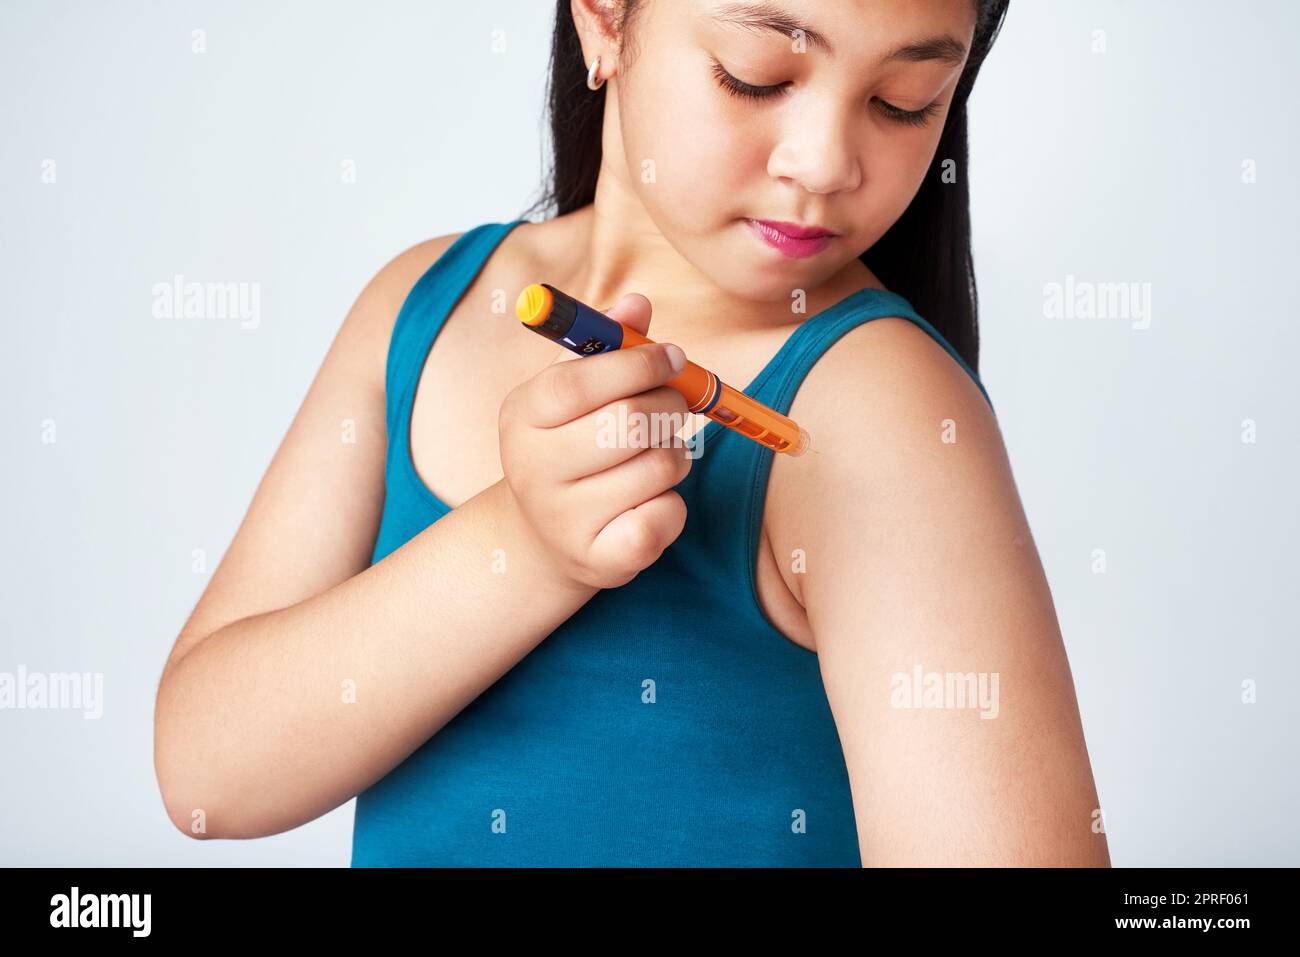 Keeping her diabetes under control. Studio shot of a cute young girl injecting herself with insulin shot against a gray background. Stock Photo